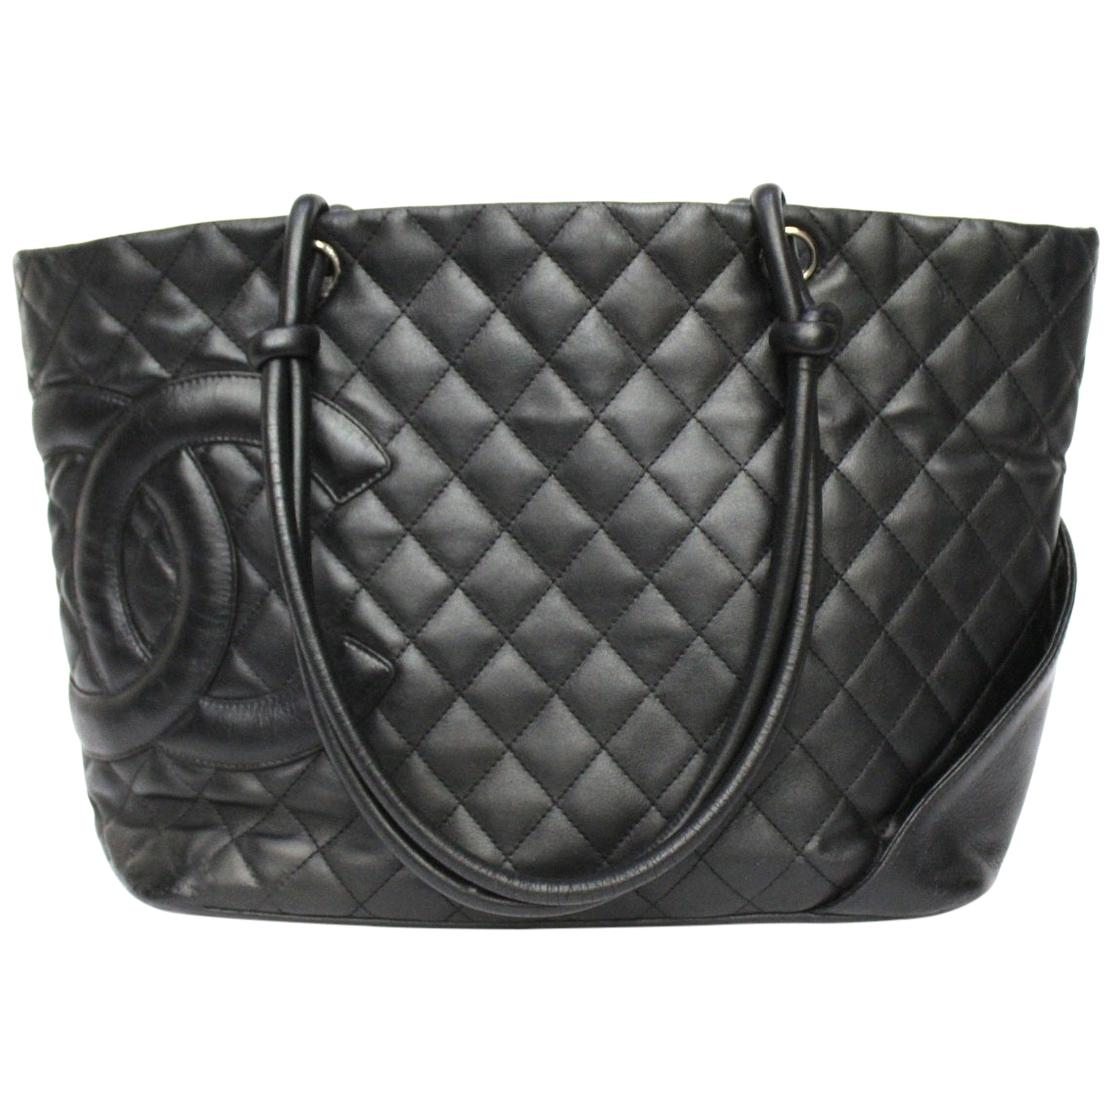 Chanel Black Leather Cambon Bag